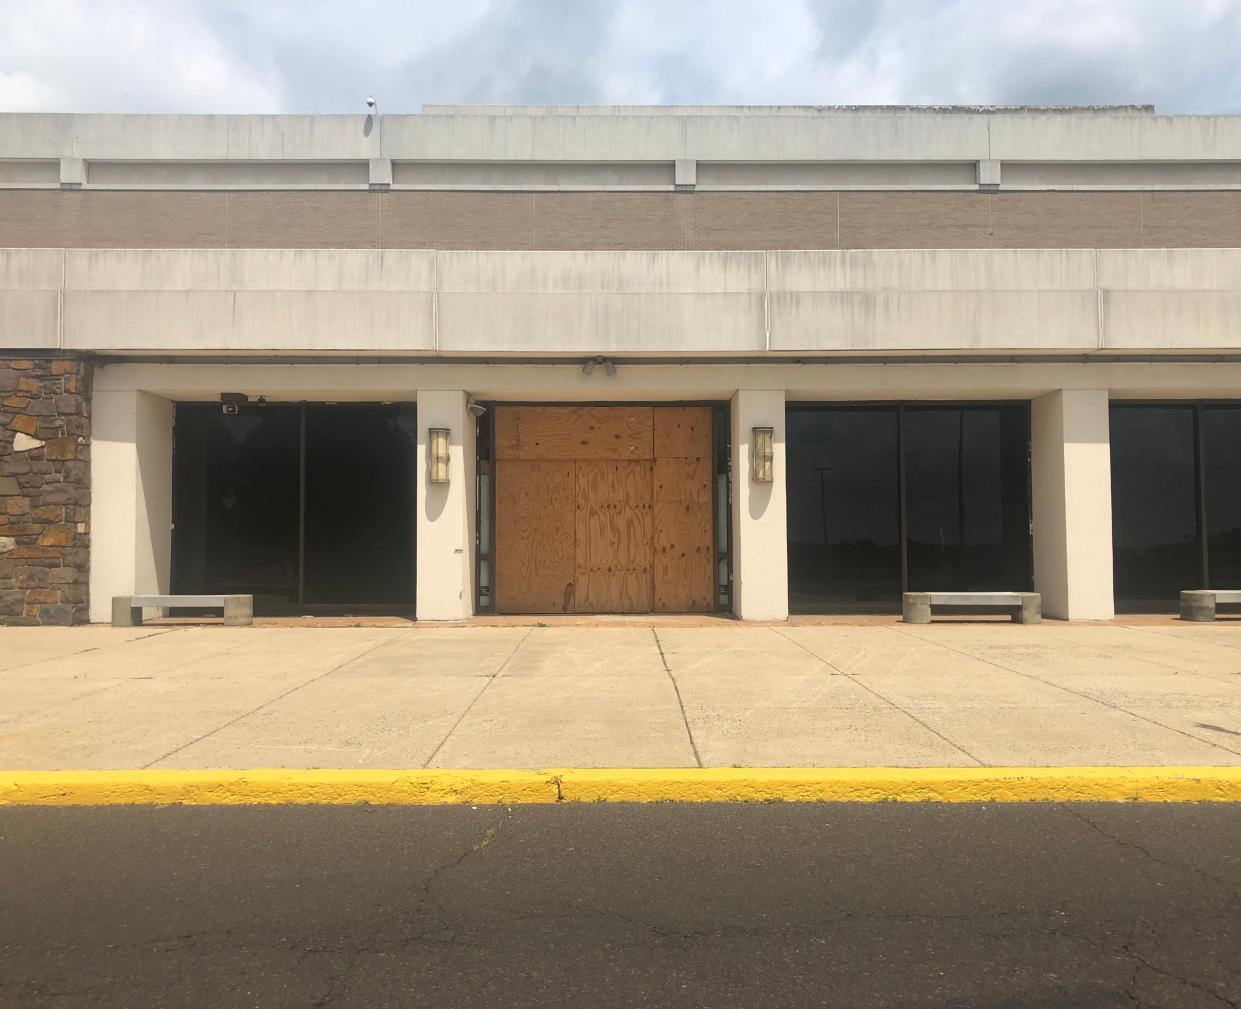 The shuttered Macy's at the Neshaminy Mall will be transformed into Fusion Gyms, a unique blend of high-end personal fitness and sports activity center at an affordable monthly cost.